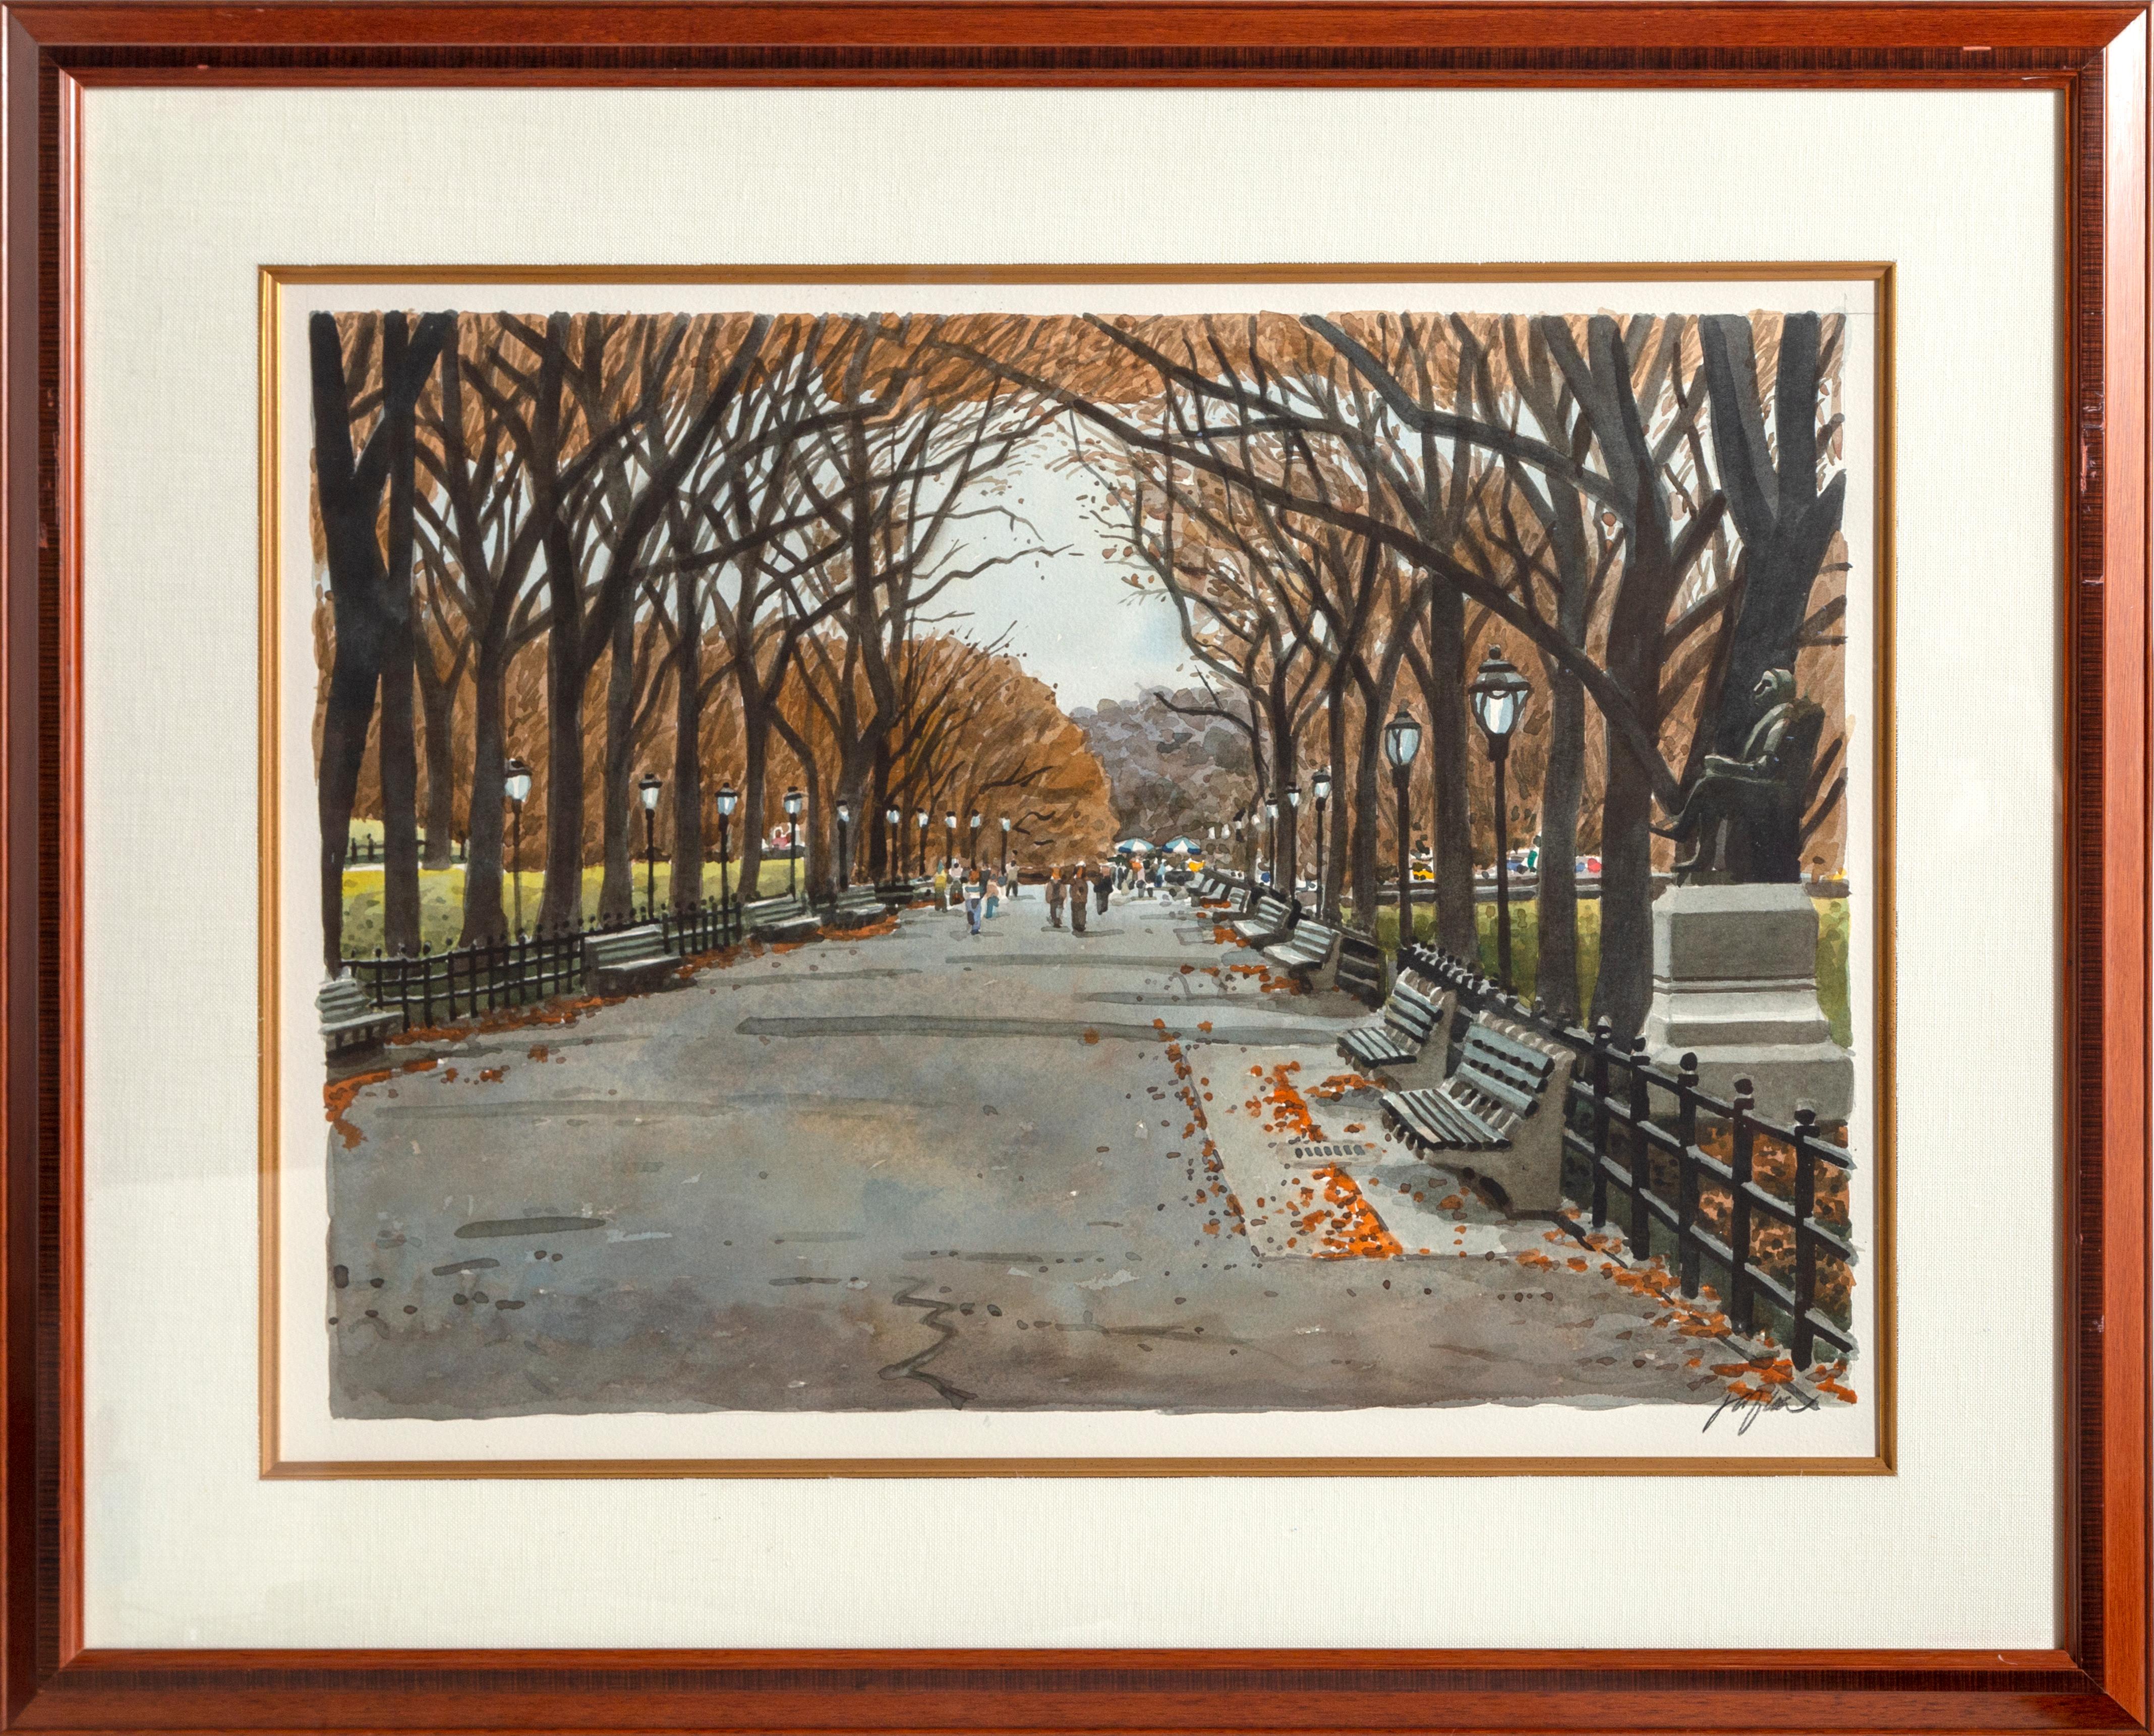 Unknown Landscape Art - Central Park in Fall, Framed Photorealist Watercolor Painting